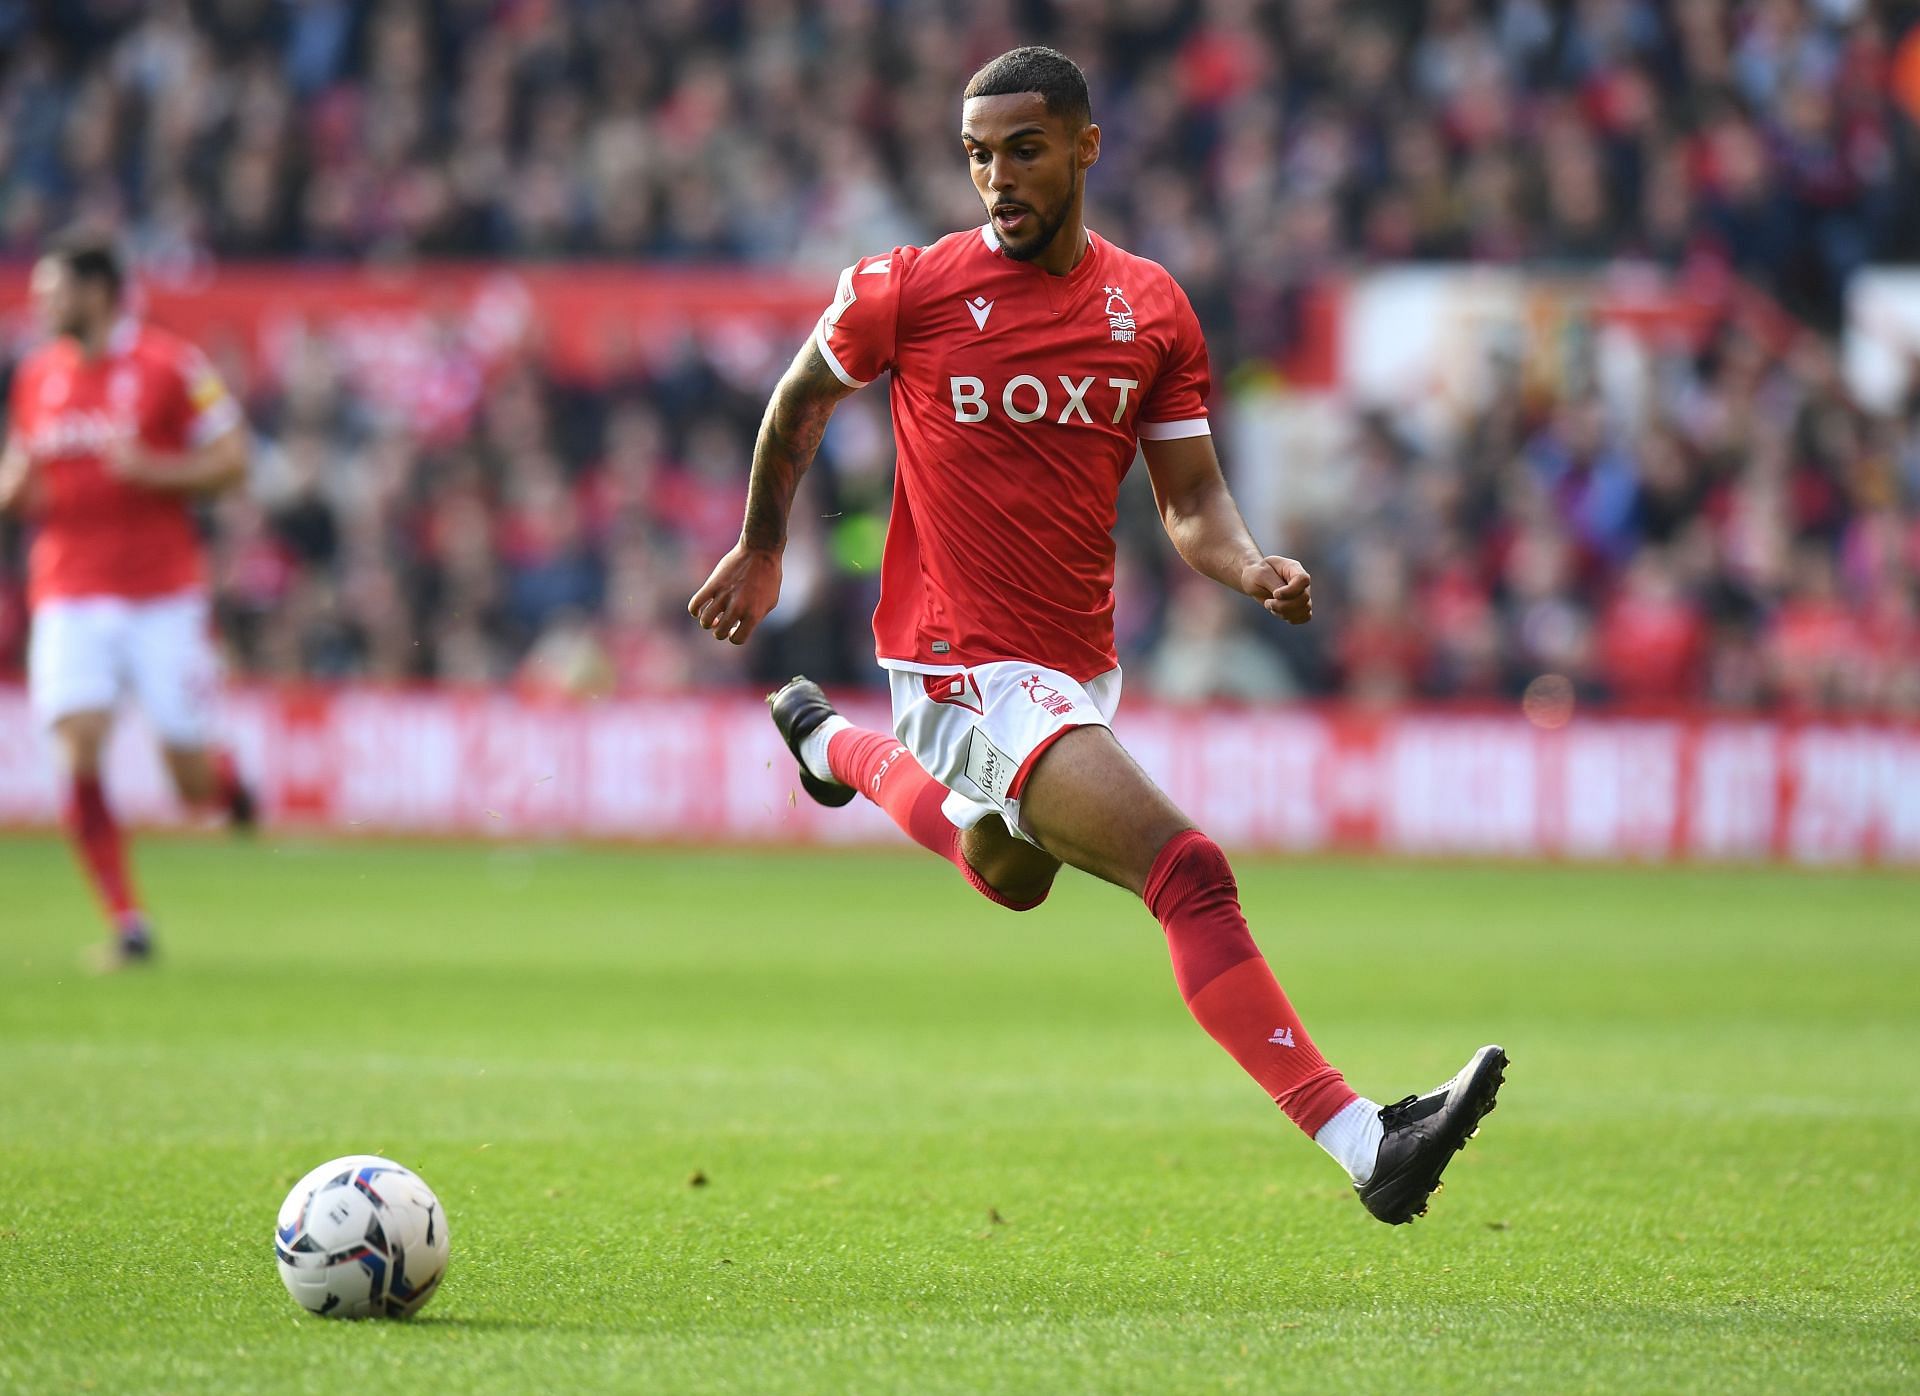 Nottingham Forest will face Bristol City on Tuesday - Sky Bet Championship